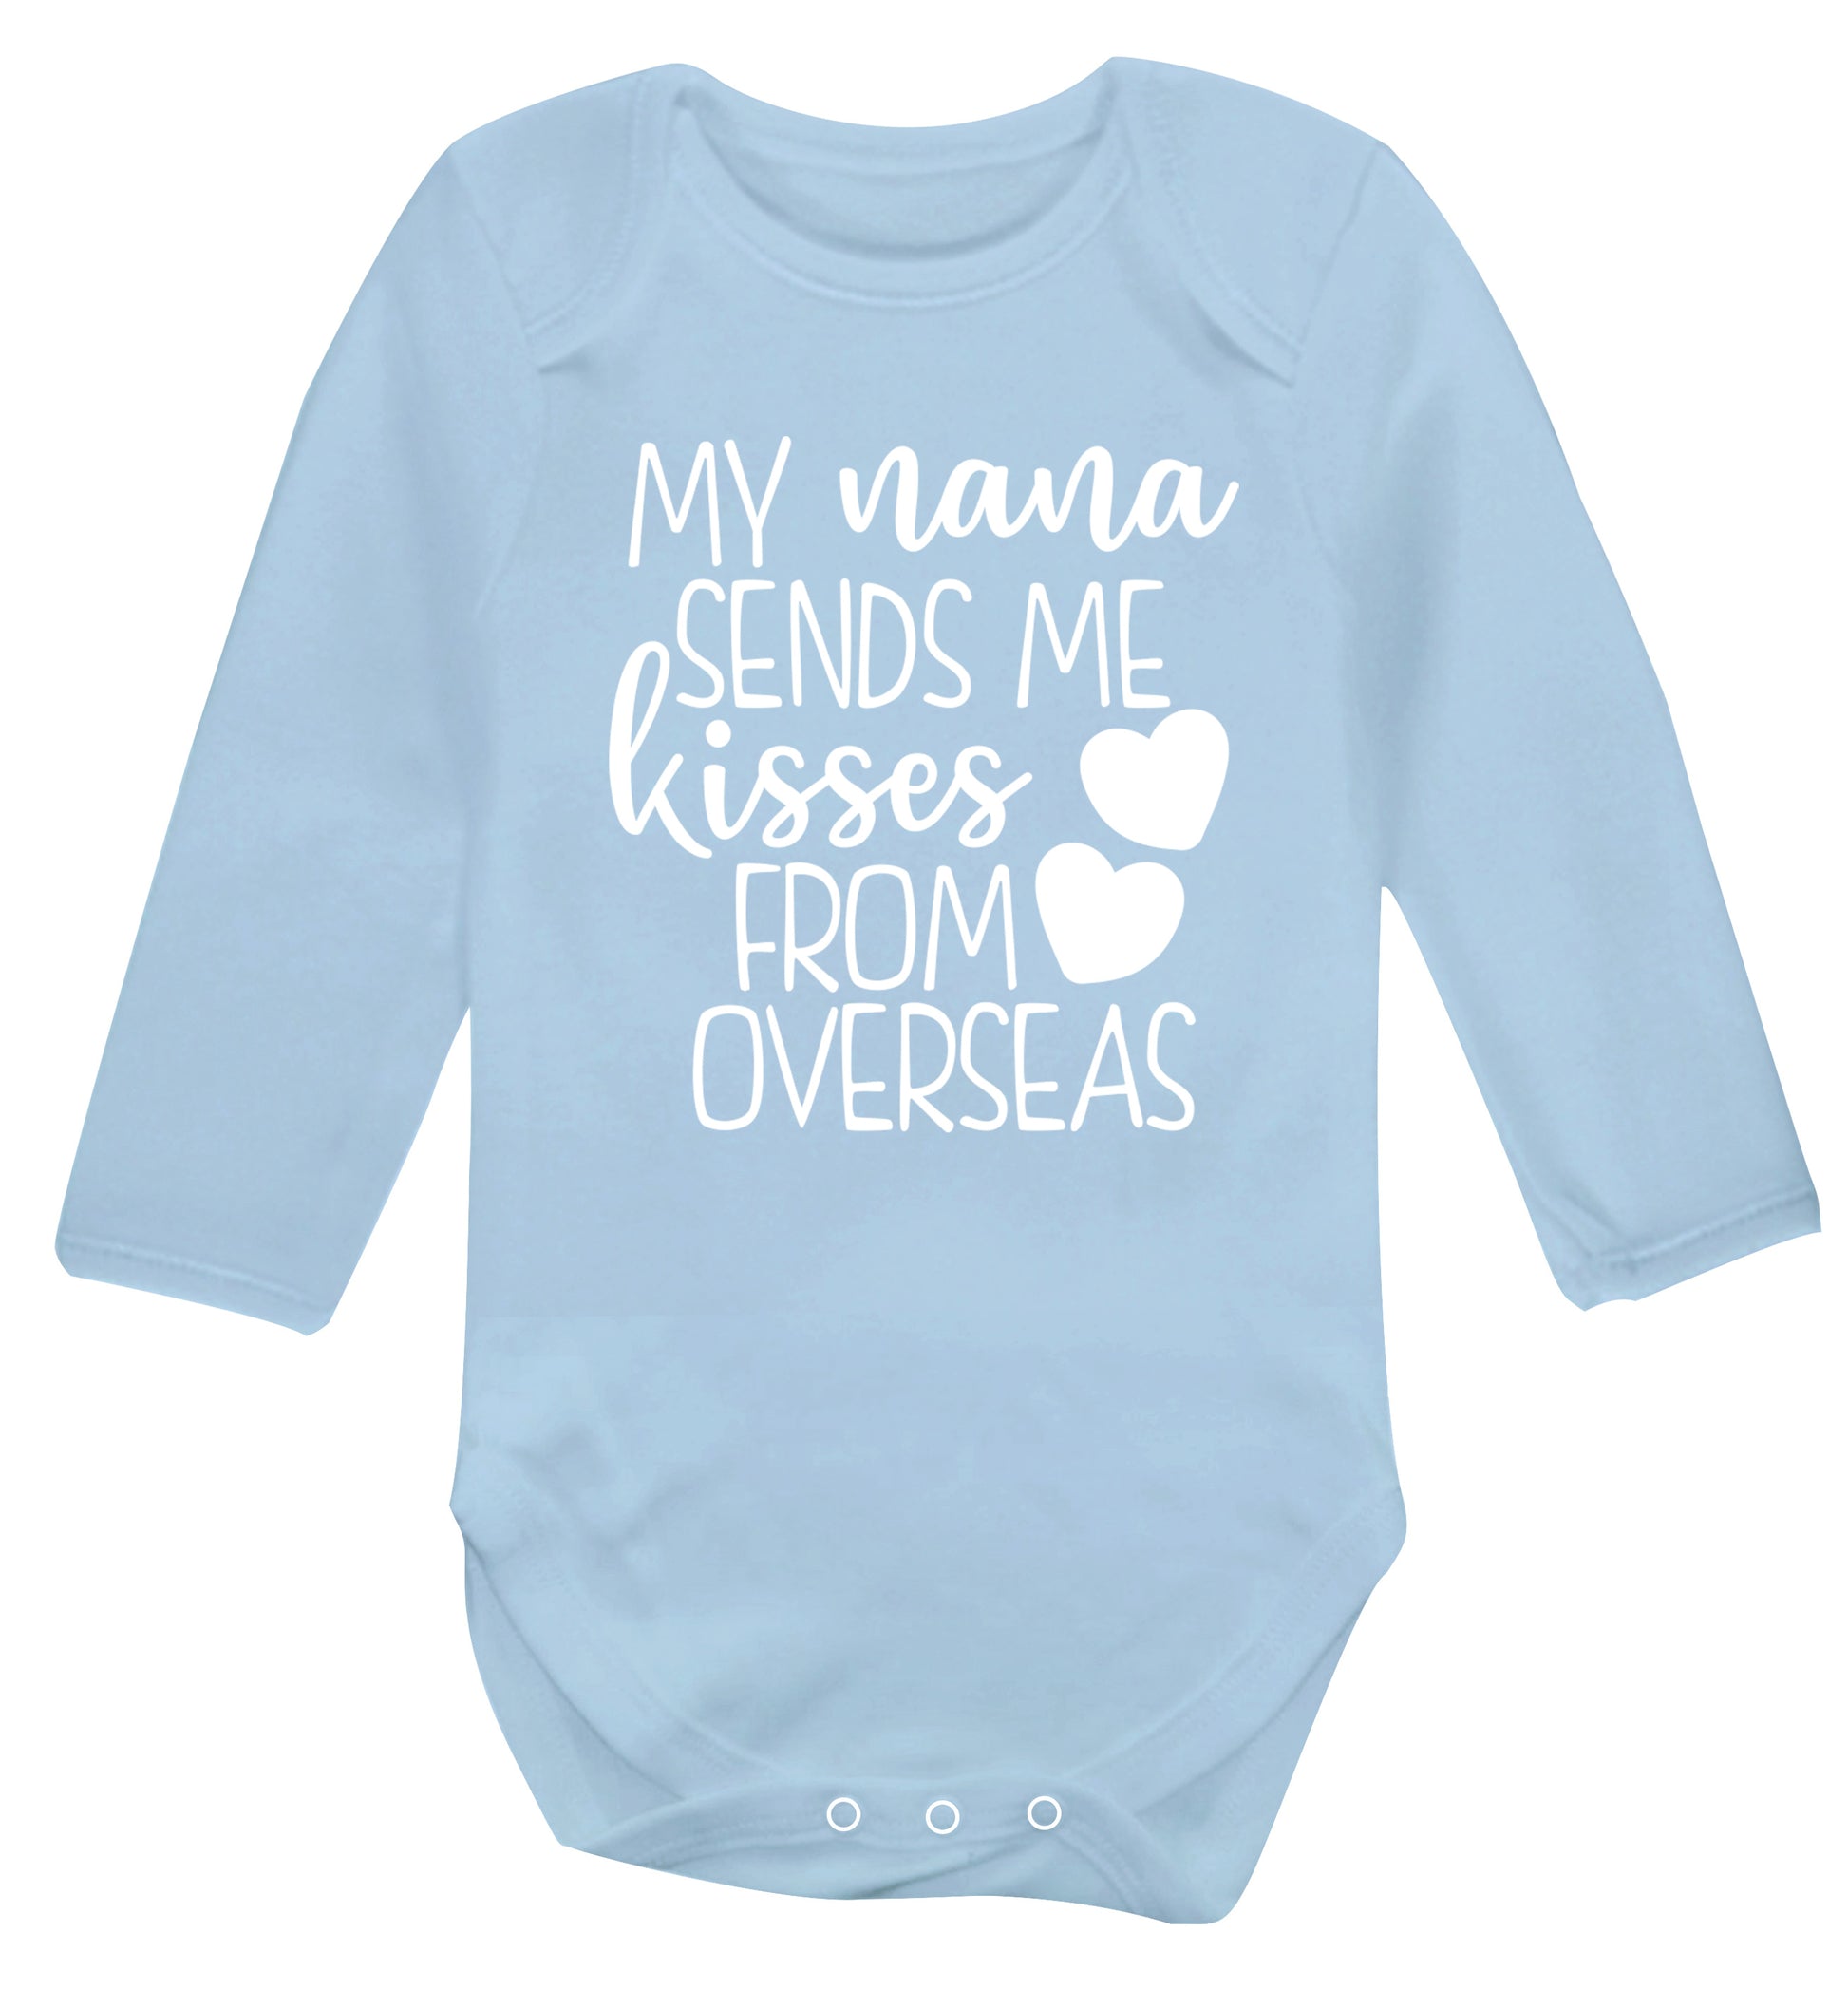 My nana sends me kisses from overseas Baby Vest long sleeved pale blue 6-12 months